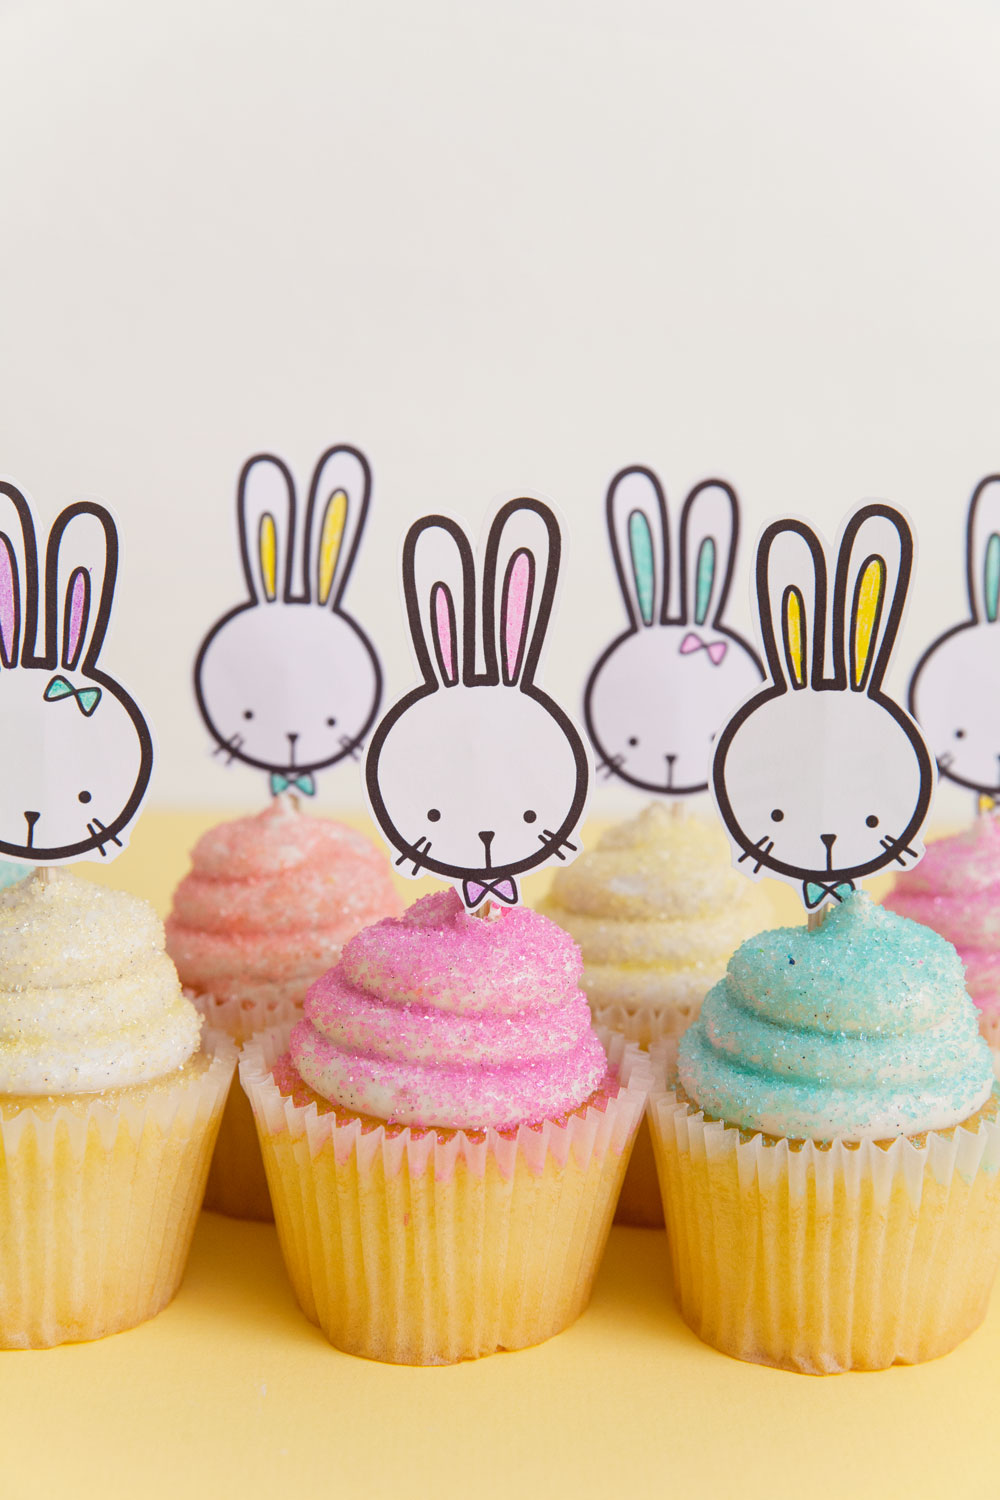 FREE printable bunny cupcake toppers, perfect for all your Easter treats  |  Tell Love and Party